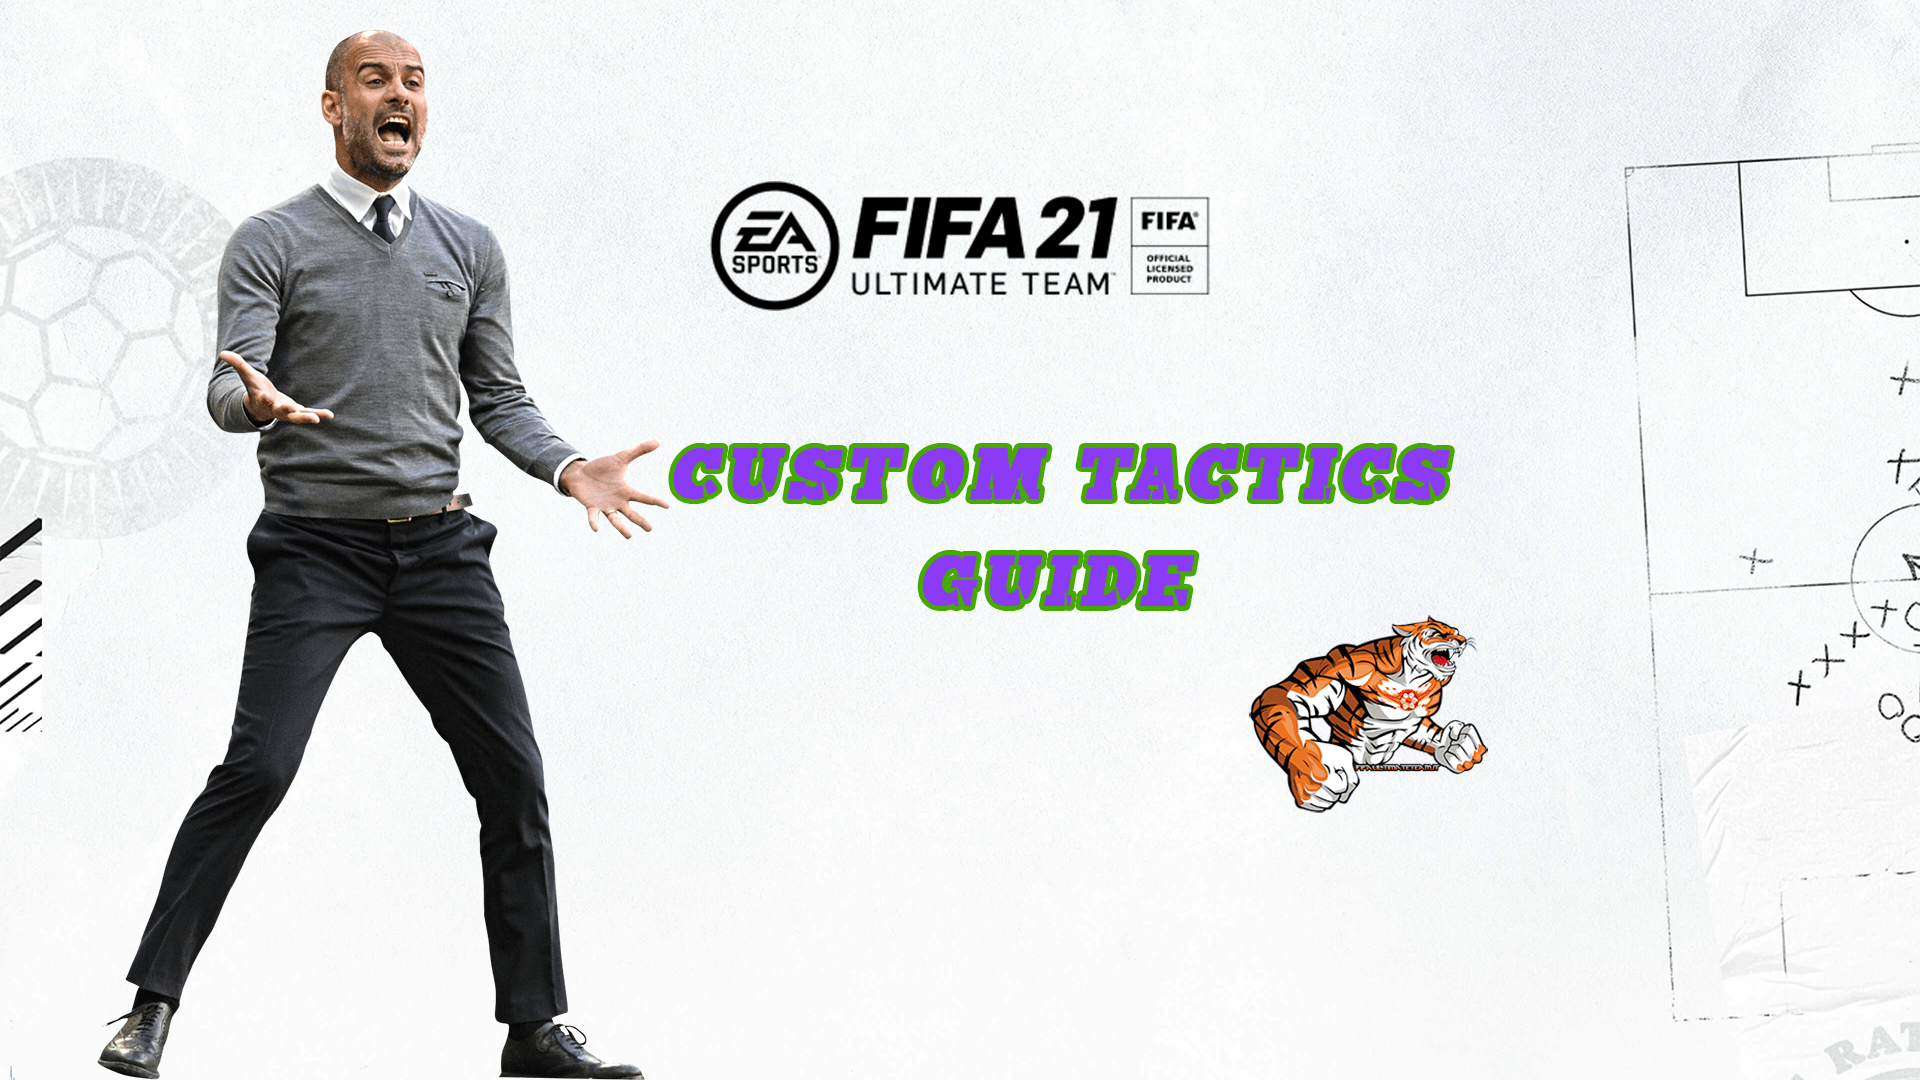 Fifa 21 The Most Used Modules In Fut 21 Custom Tactics Guide And Player Instructions Fifaultimateteam It Uk